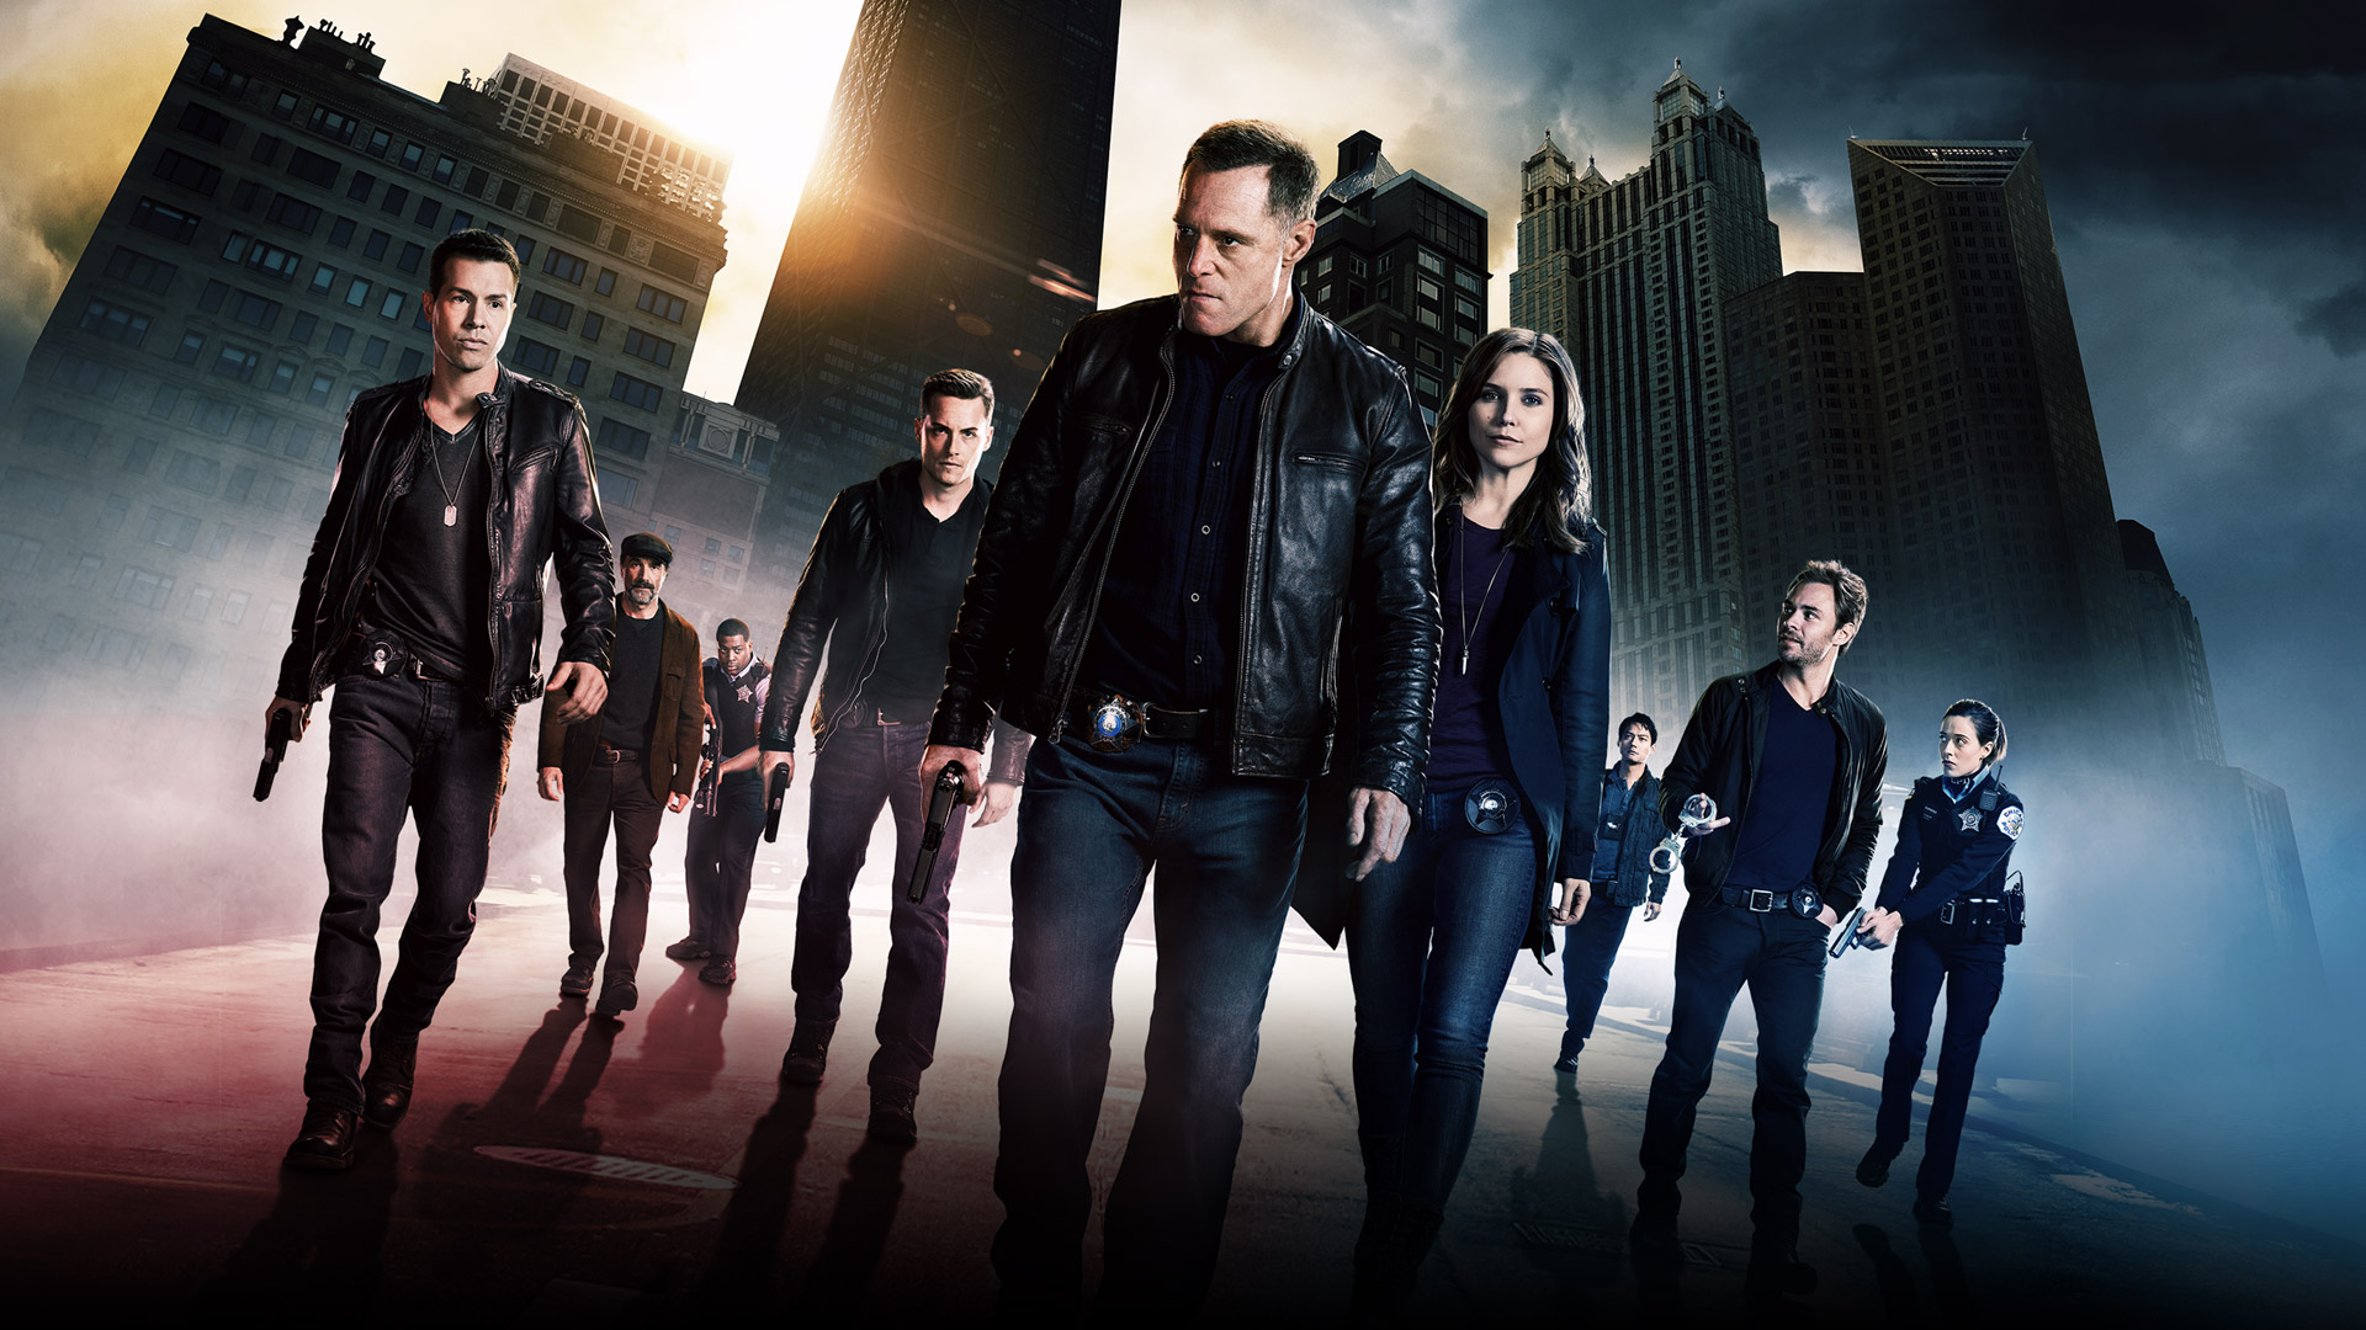 Casting 5 New Roles for NBC's Chicago PD!